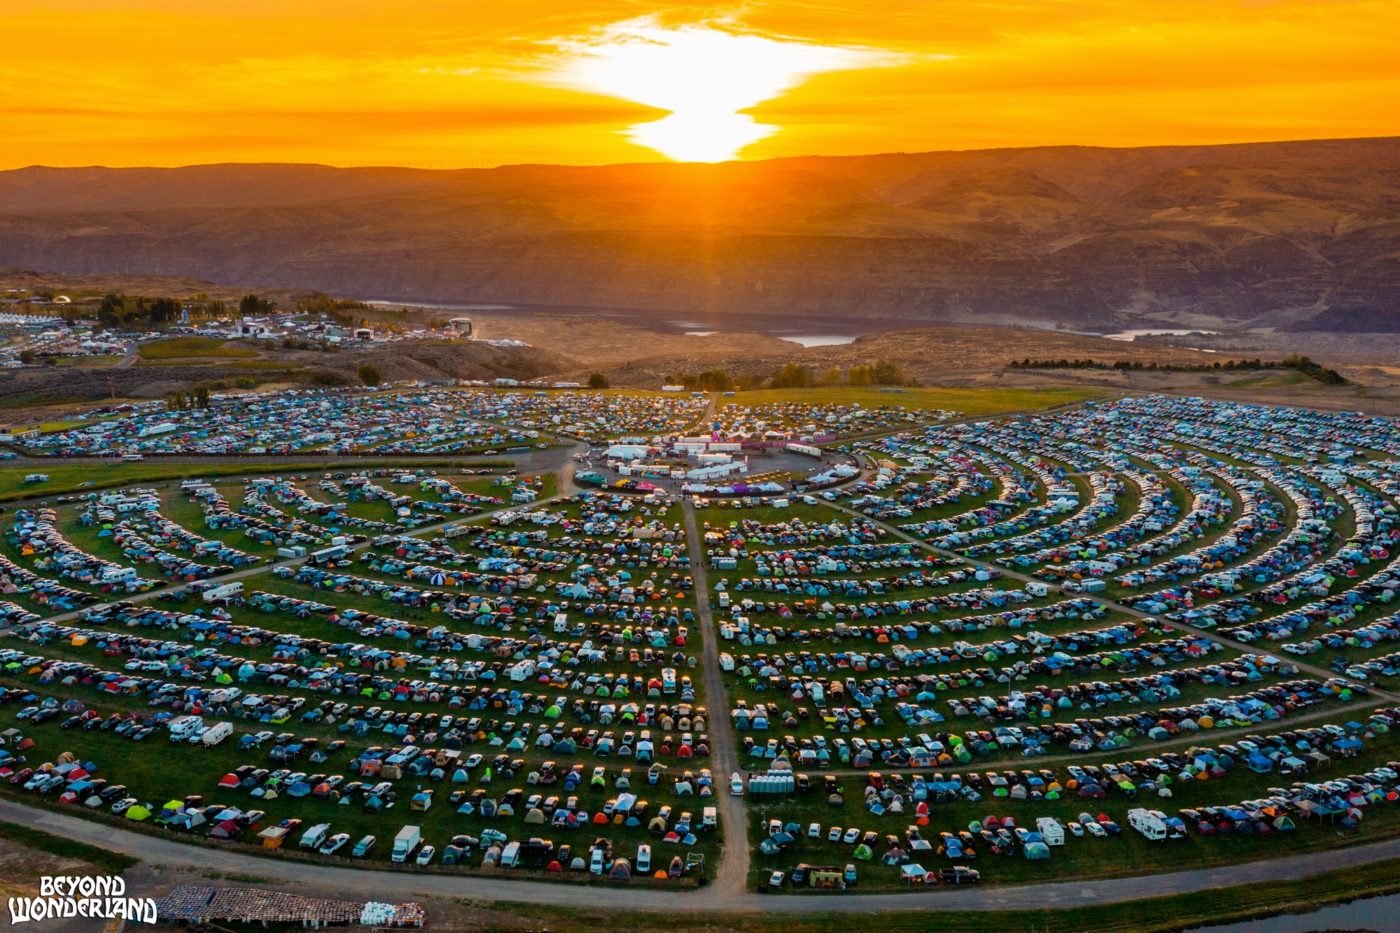 An overhead view of a large campground with overlooking a river with the sun setting in the background.